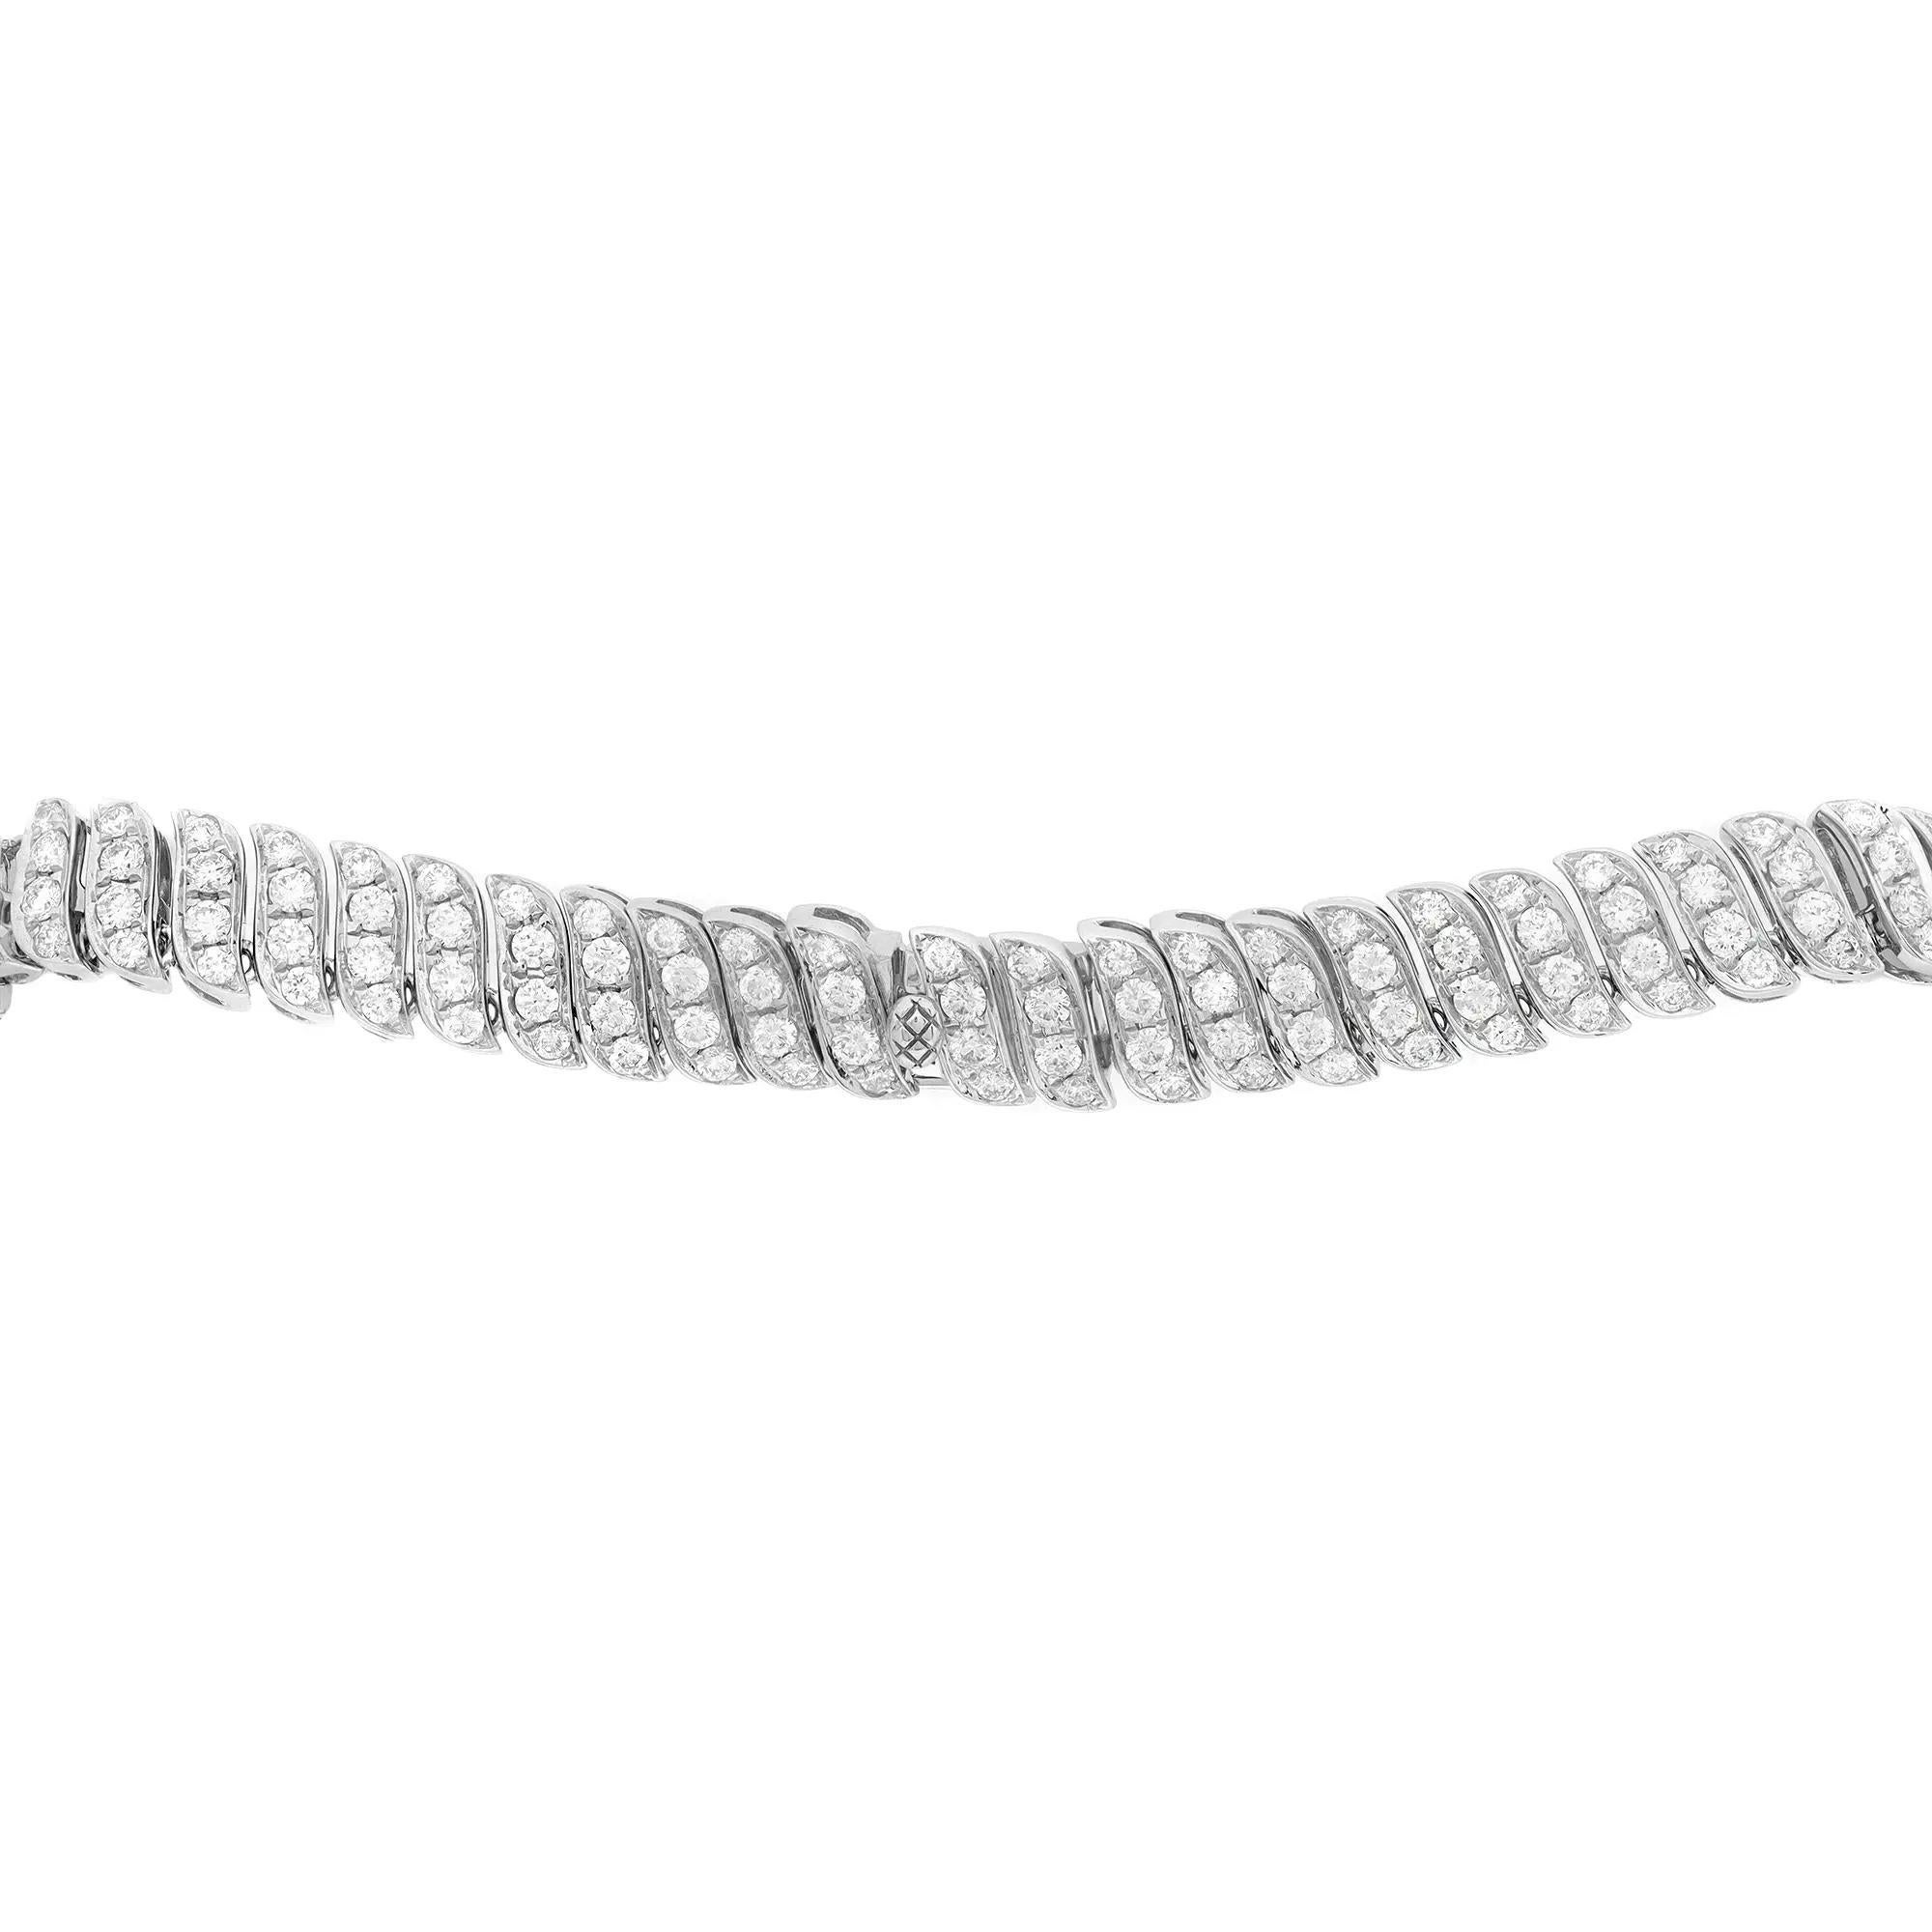 8.33Cttw Round Cut Diamond Statement Necklace 18K White Gold 16 Inches In New Condition For Sale In New York, NY